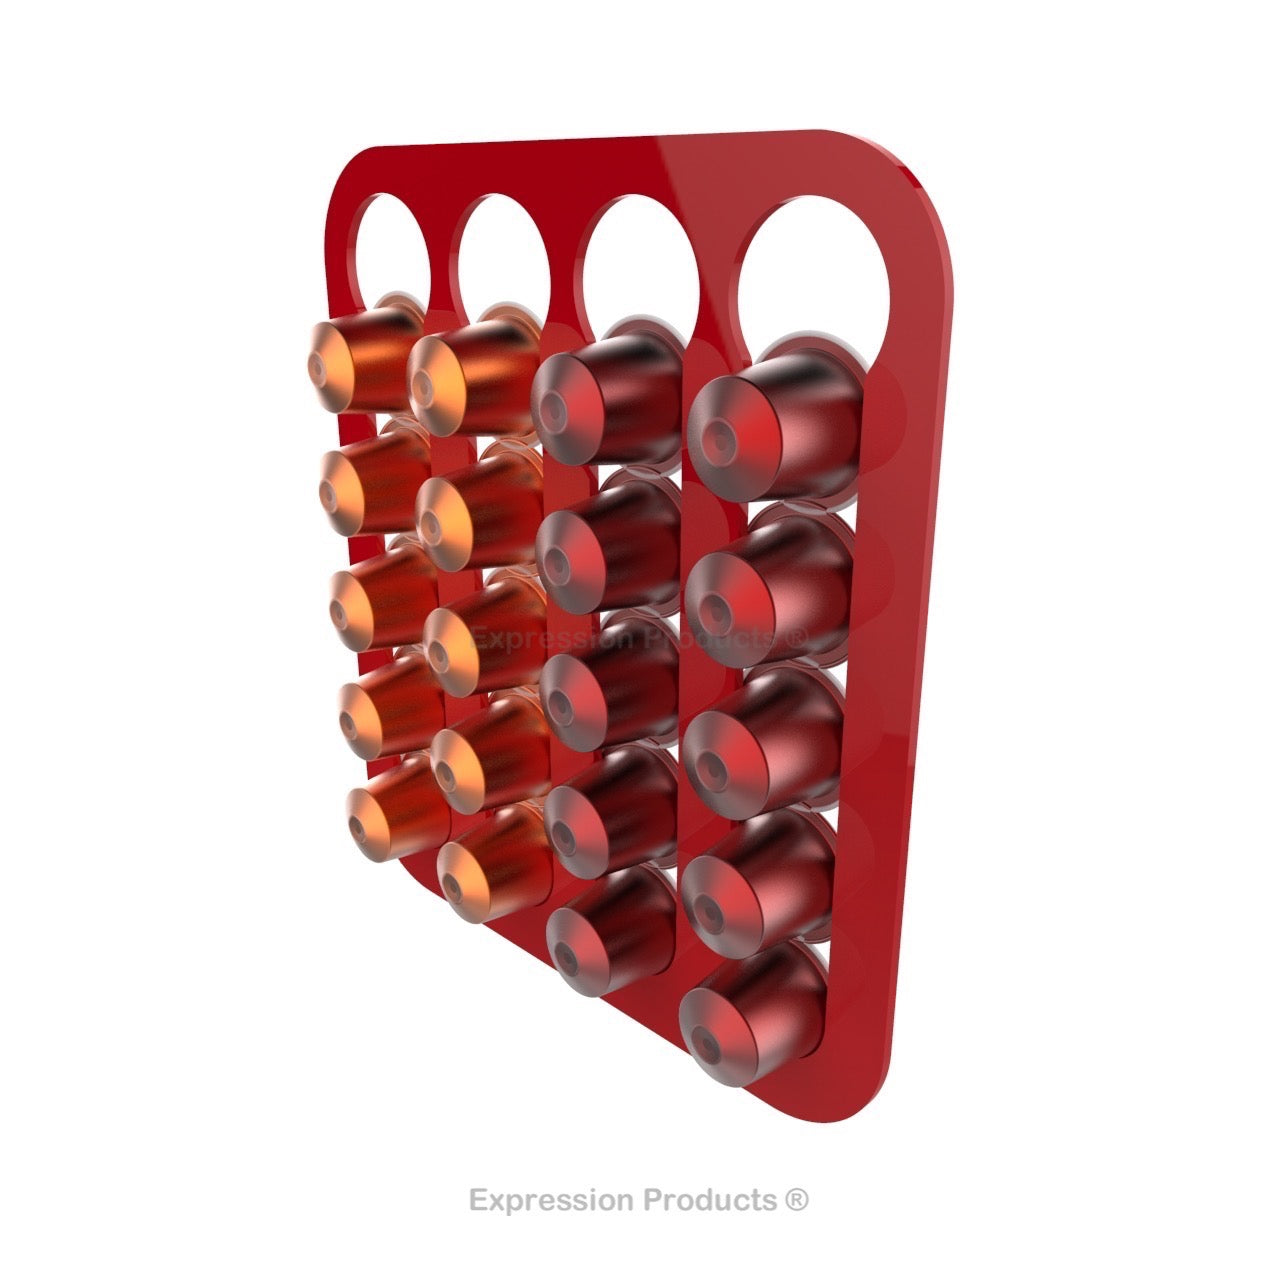 Magnetic Nespresso Original Line coffee pod holder shown in red holding 20 pods